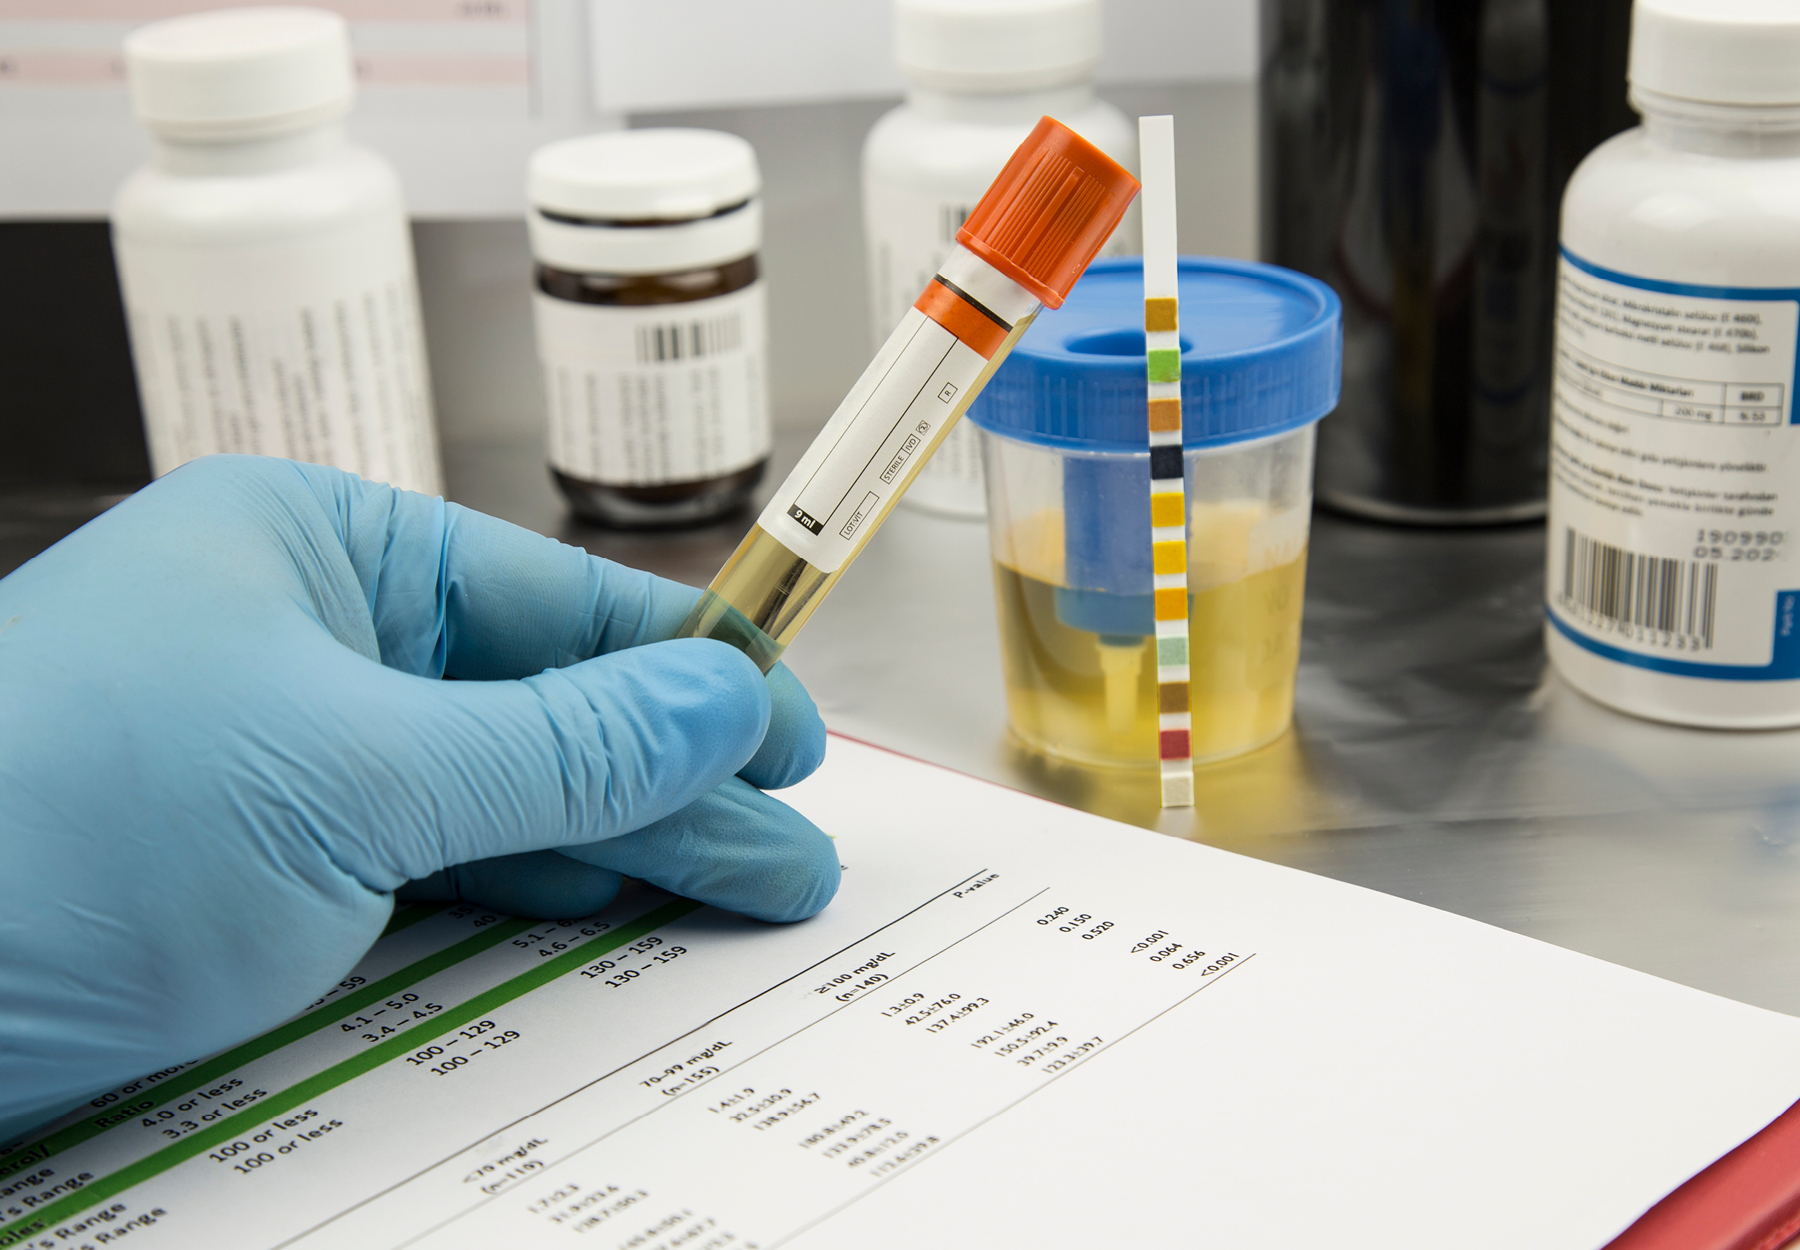 Closeup of gloved lab worker's hand holding a test tube of urine with a test strip and urine sample container in the background. Urine testing concept. iStock image.